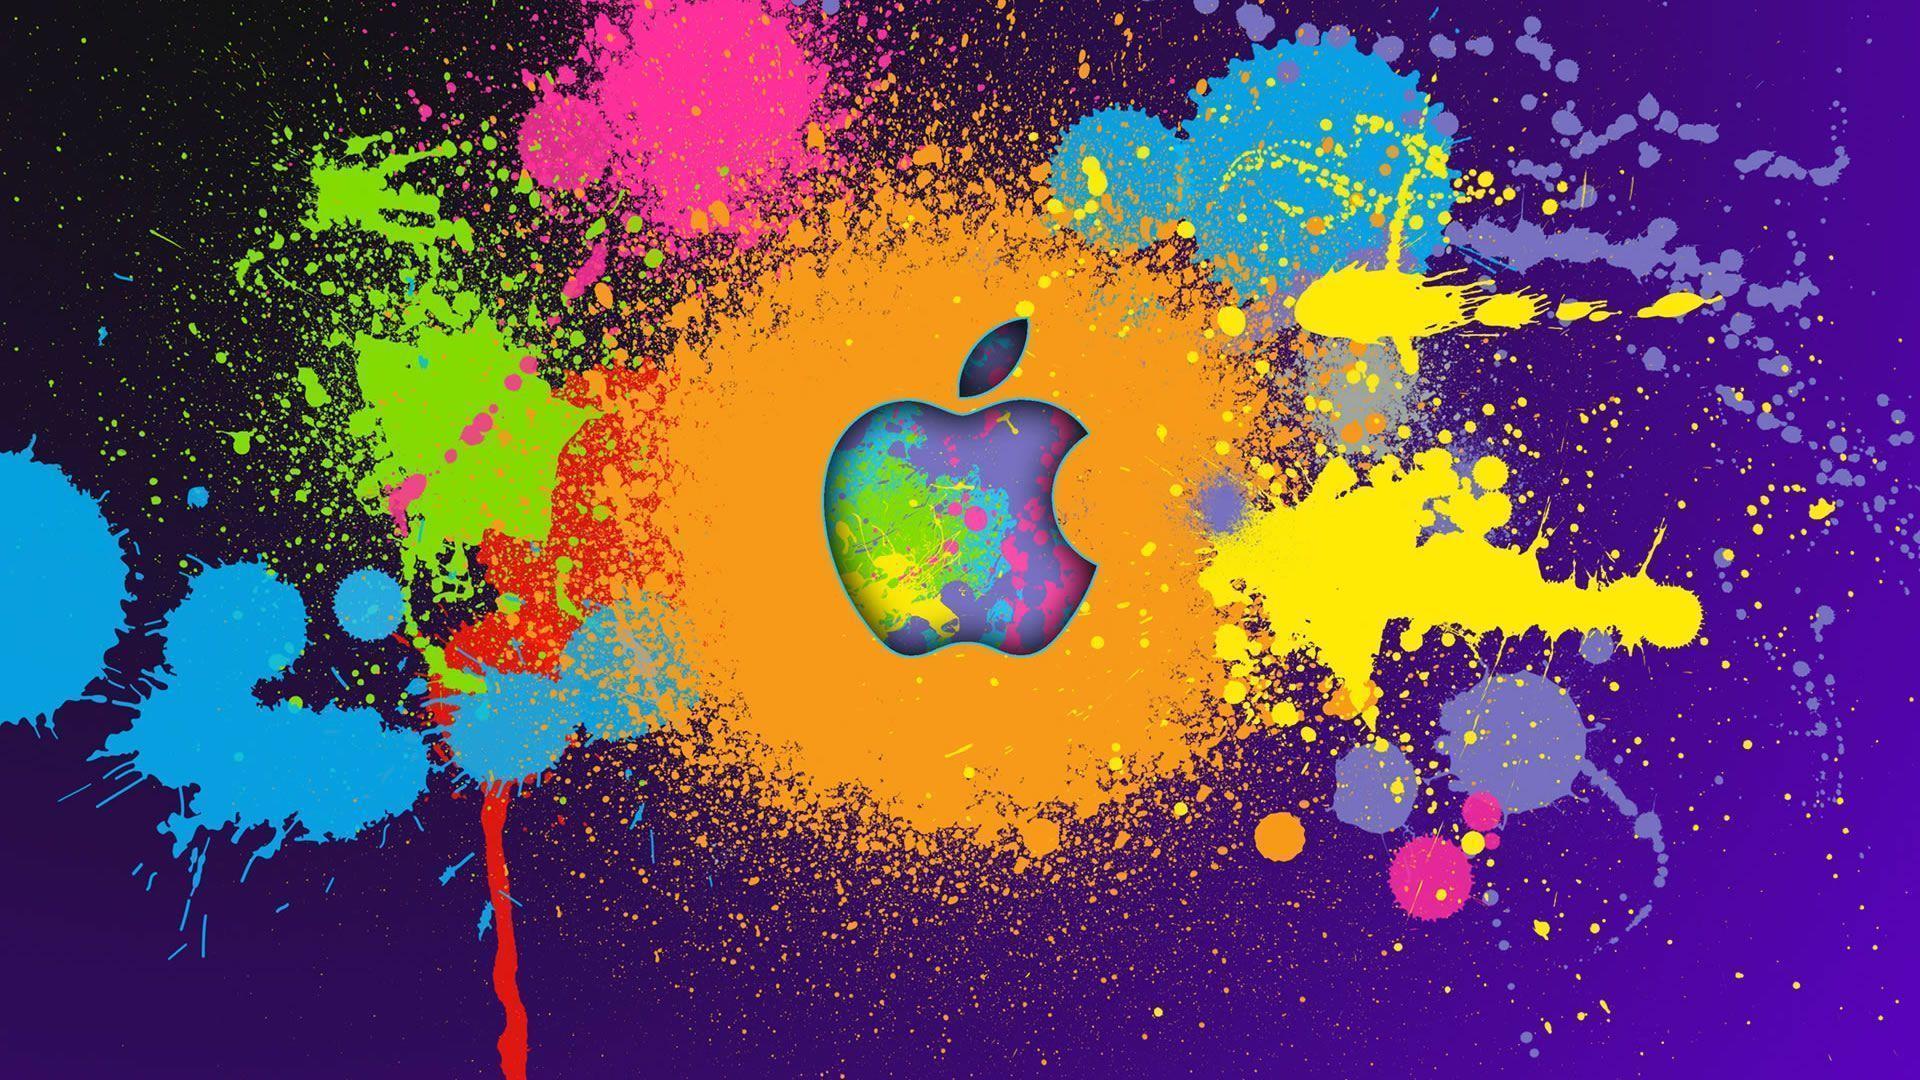 Awesome Apple Background 14252 1920x1080 px